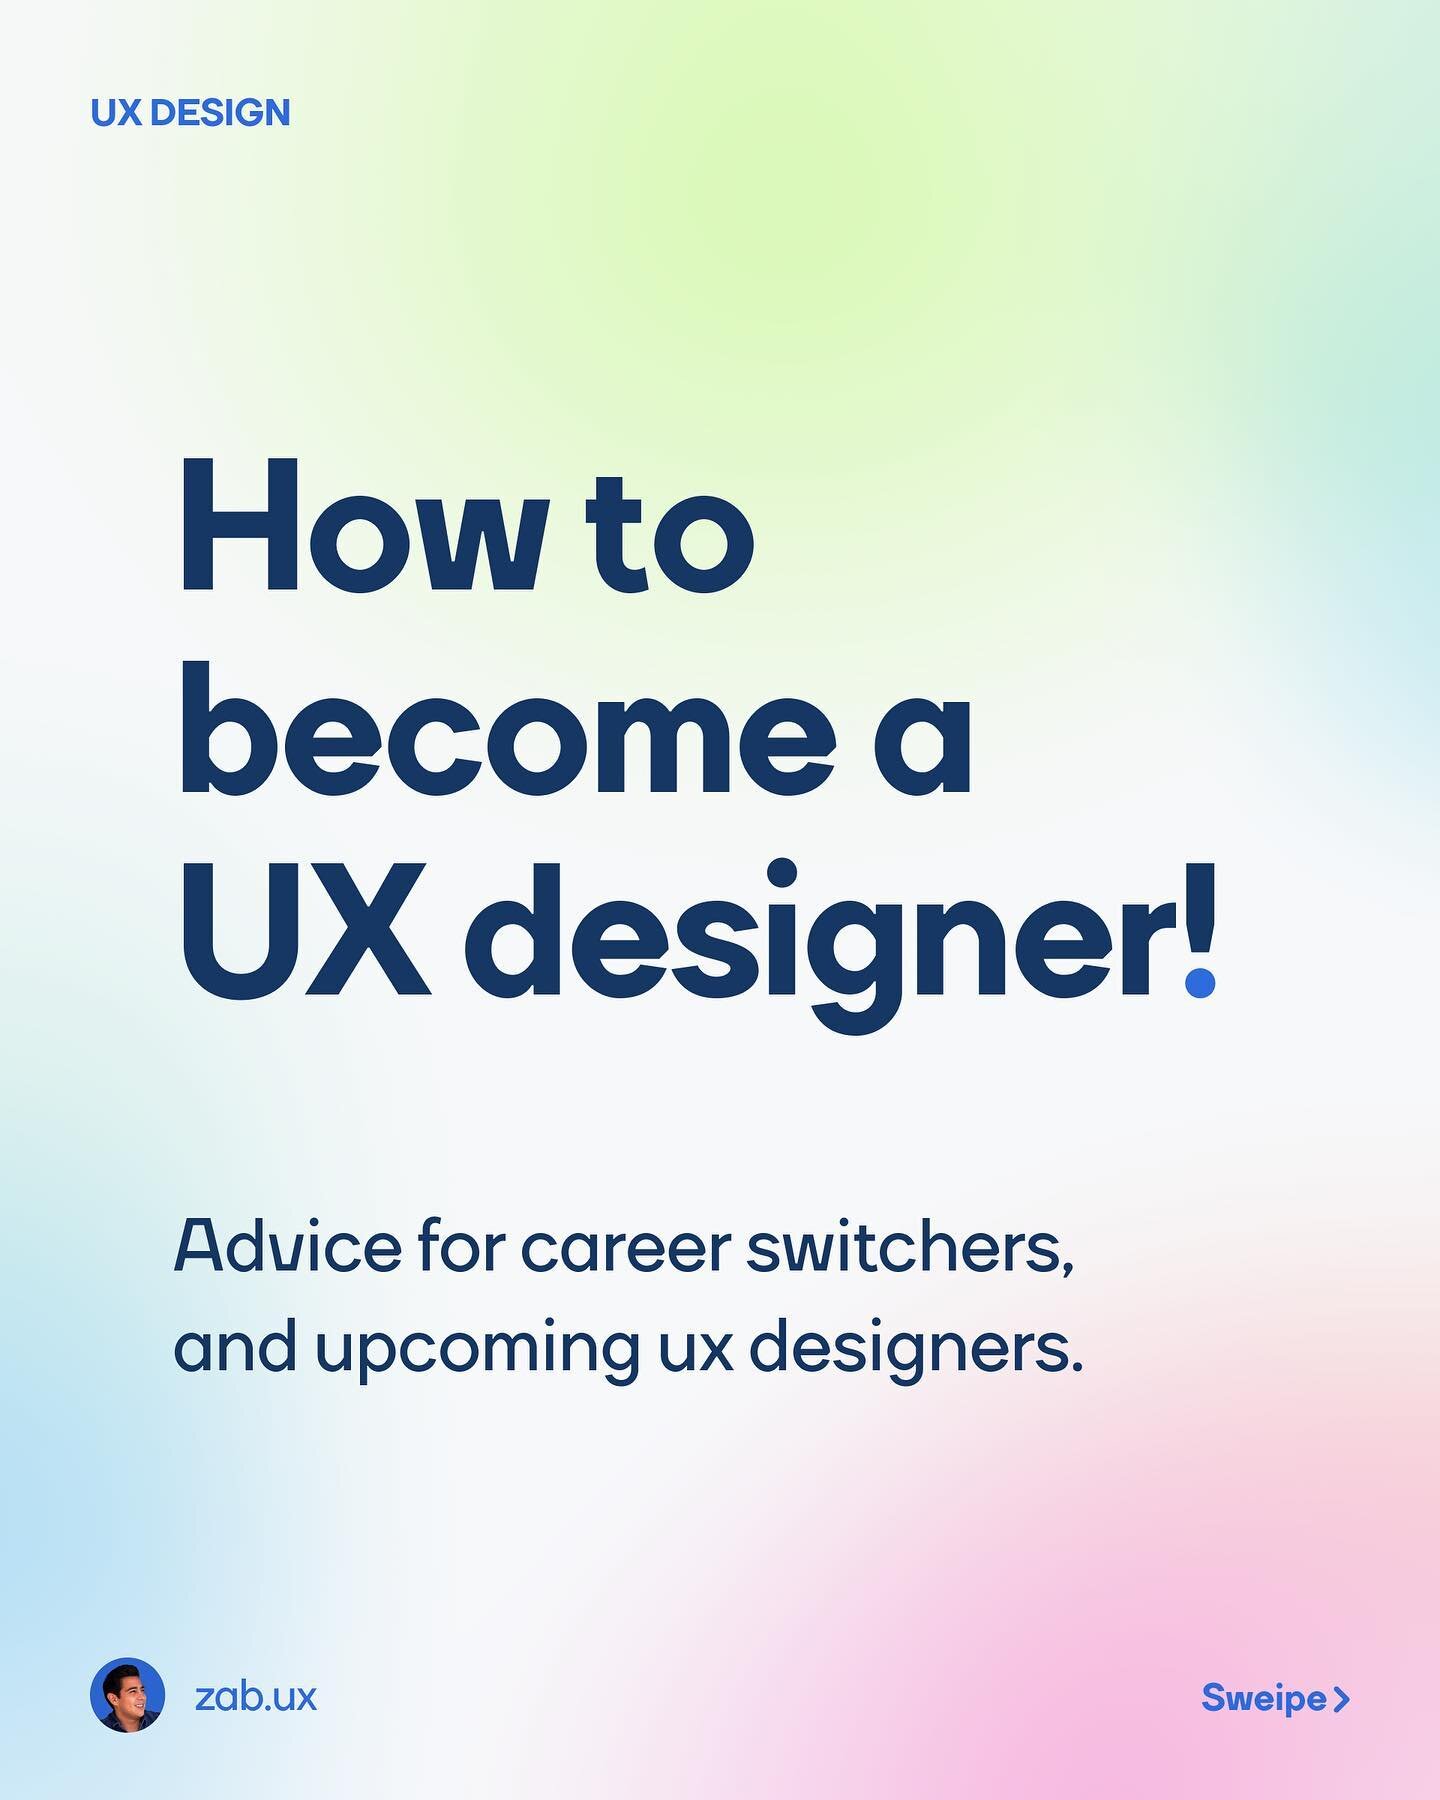 See many people asking the same questions about hot to get into ux. Well here is my 2&cent;
.
.
#design #designcareer #designprocess #designer #designers #uxdesign #productdesign #uxdesigner #uxdesigners #designthinking #productdesigner #uxlife #uxre